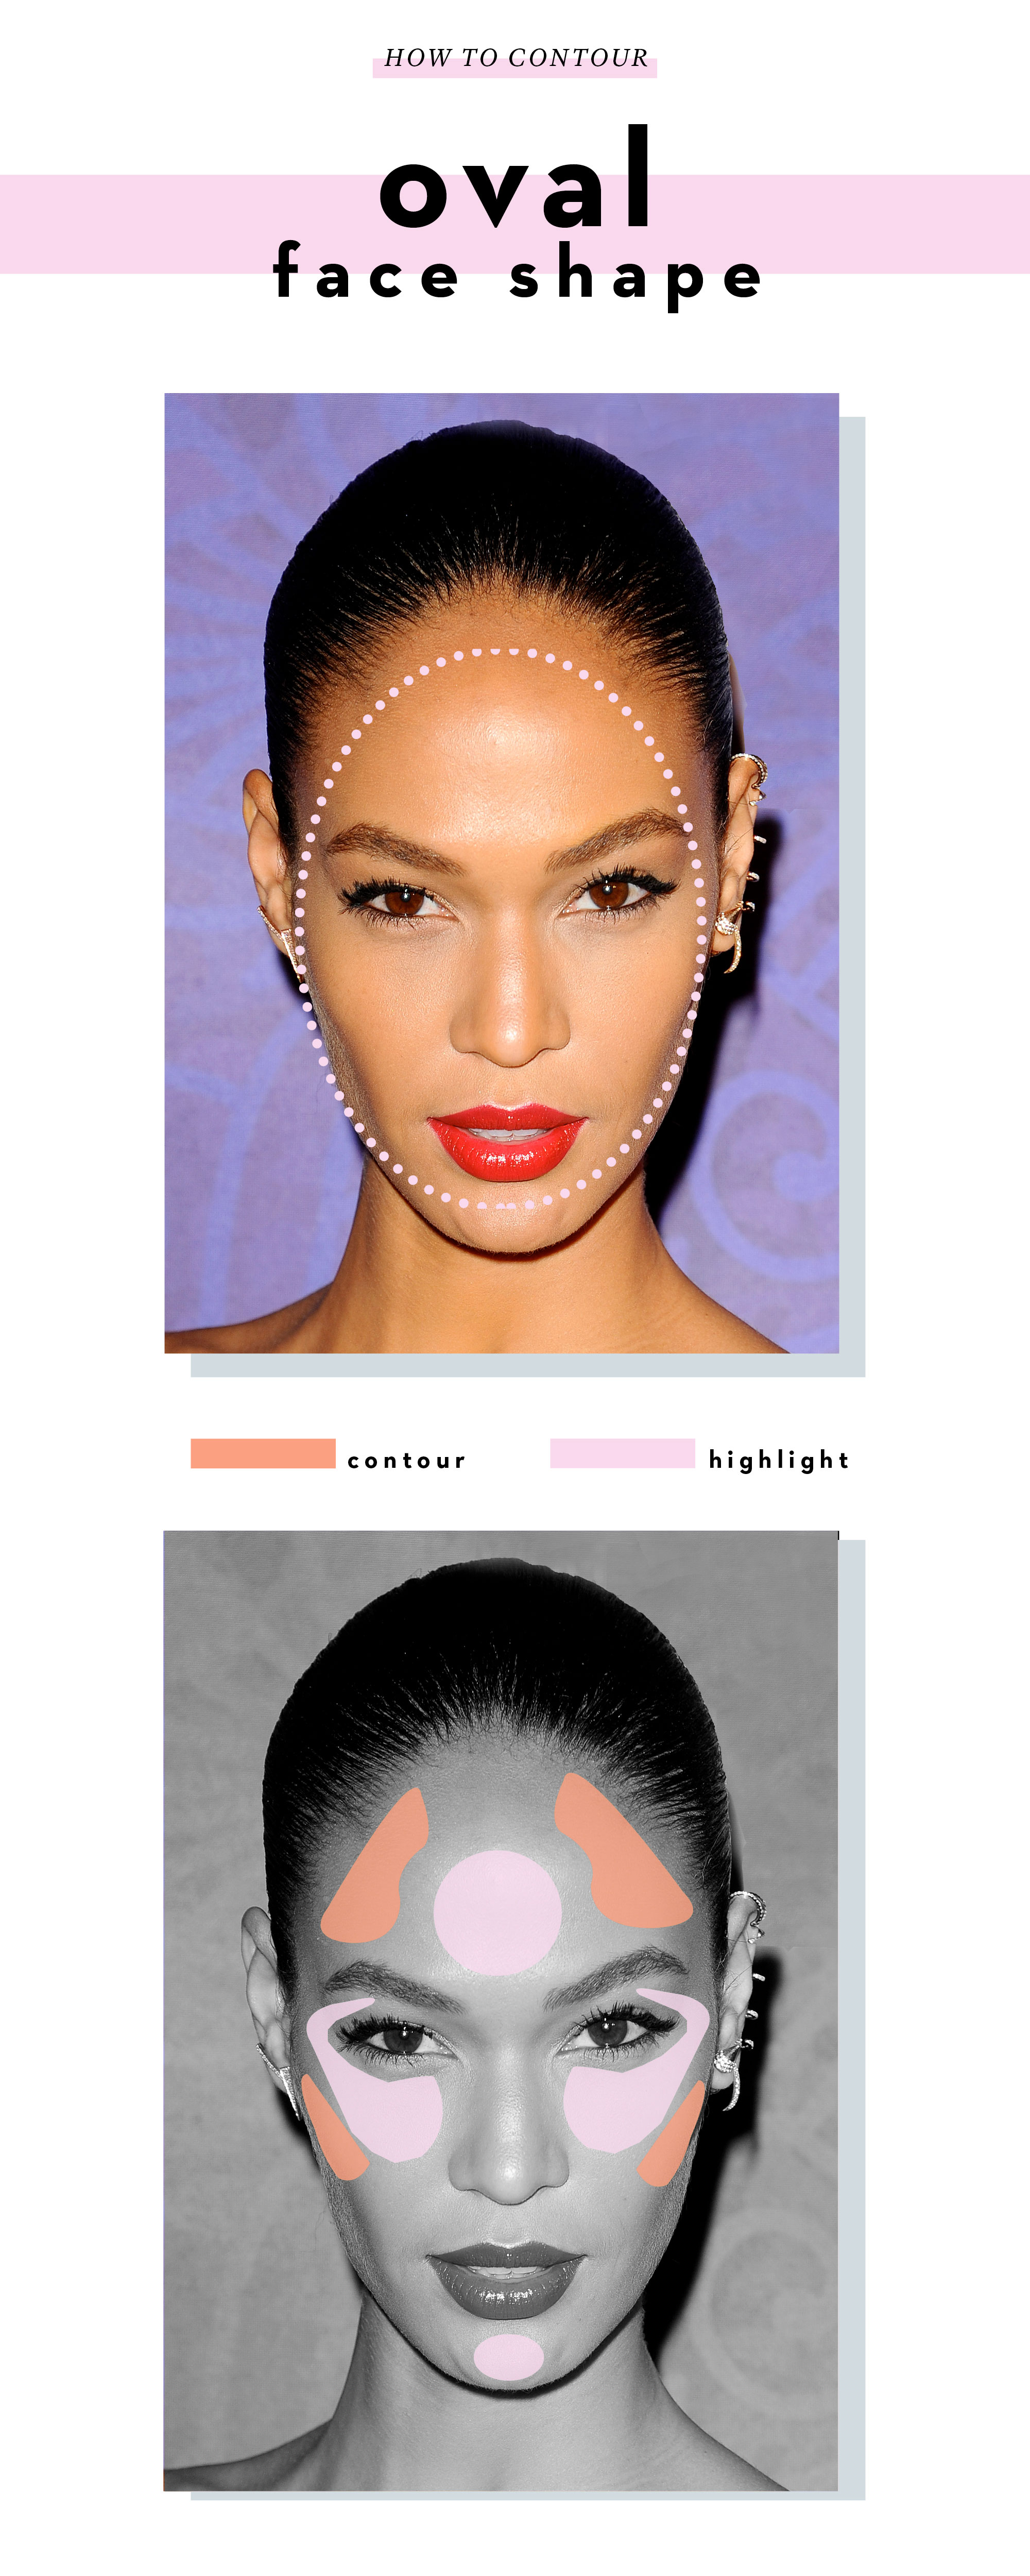 How to contour an oval face shape